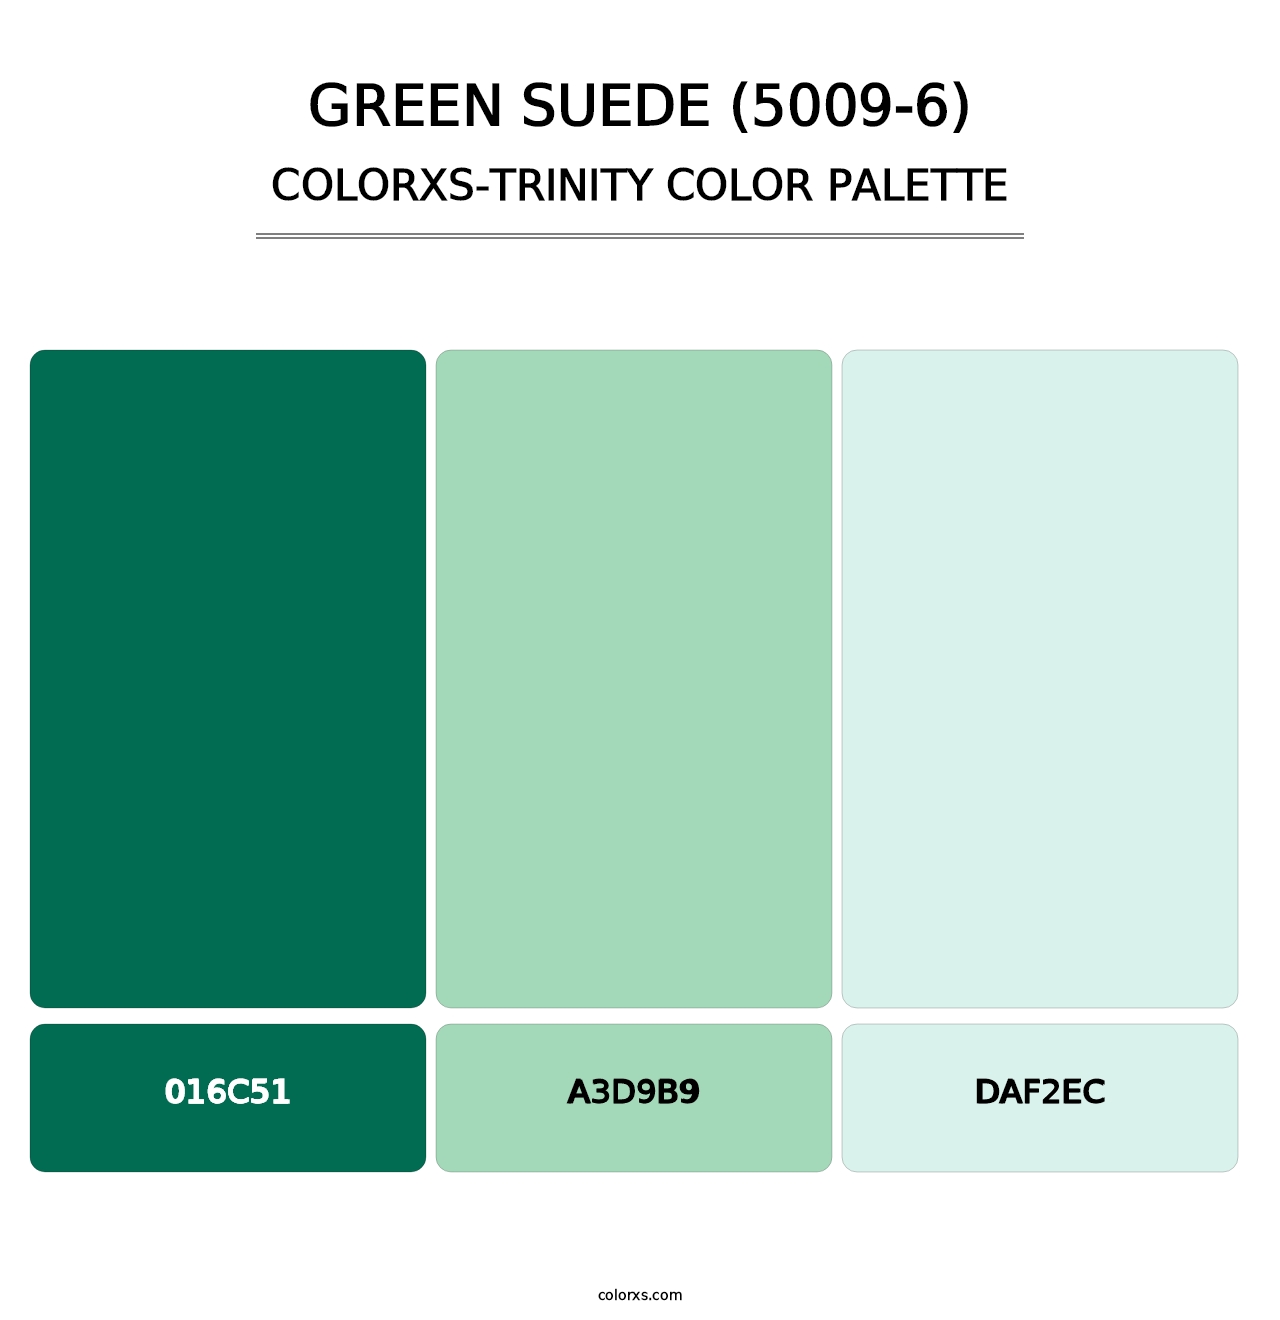 Green Suede (5009-6) - Colorxs Trinity Palette